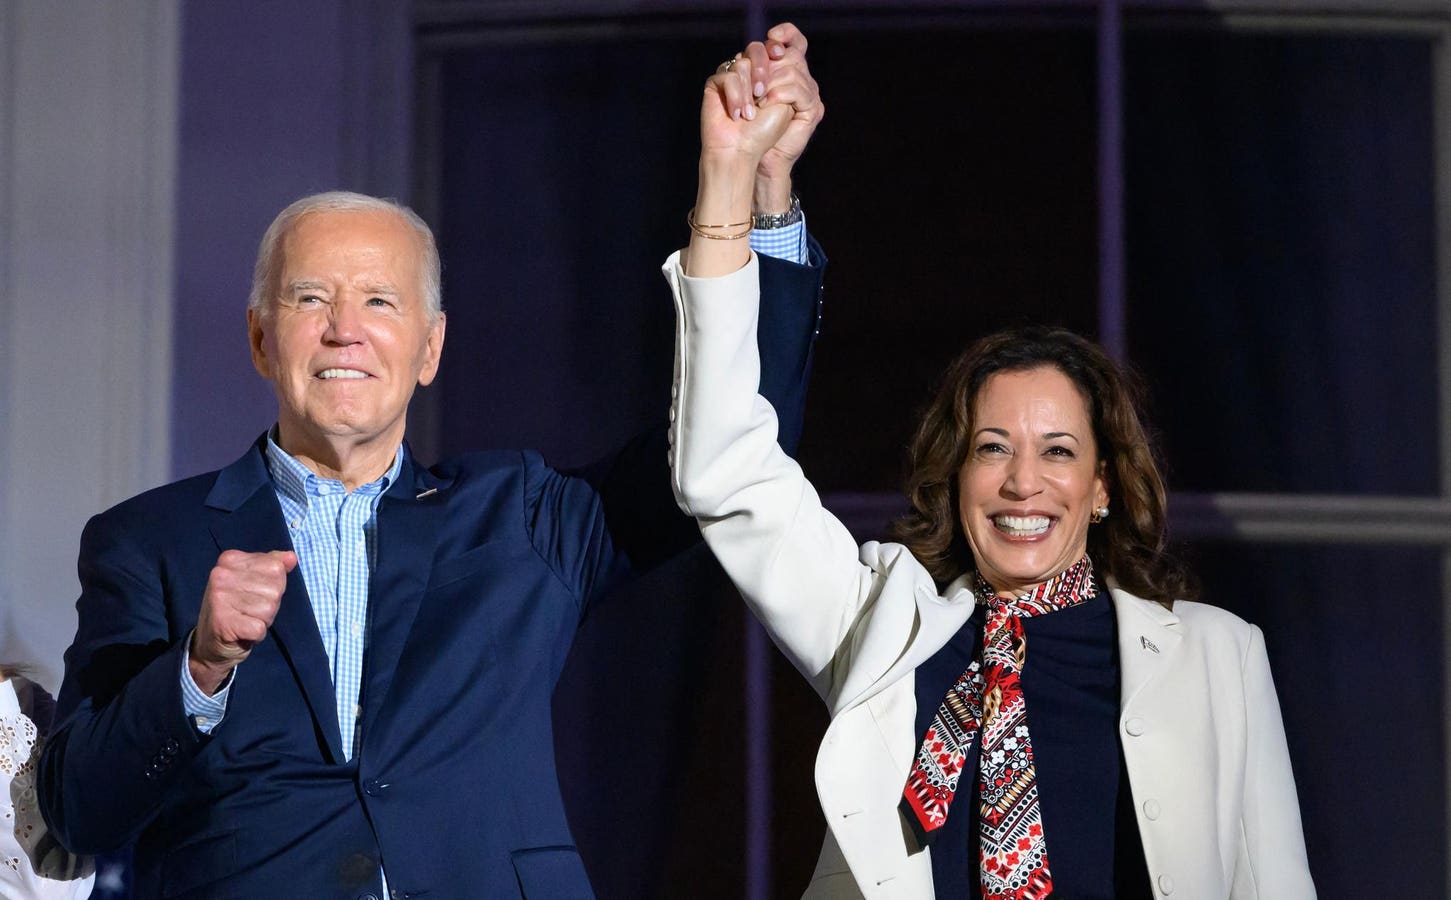 Here’s What To Know About Kamala Harris’ Record—As Biden Drops Out And Endorses Her